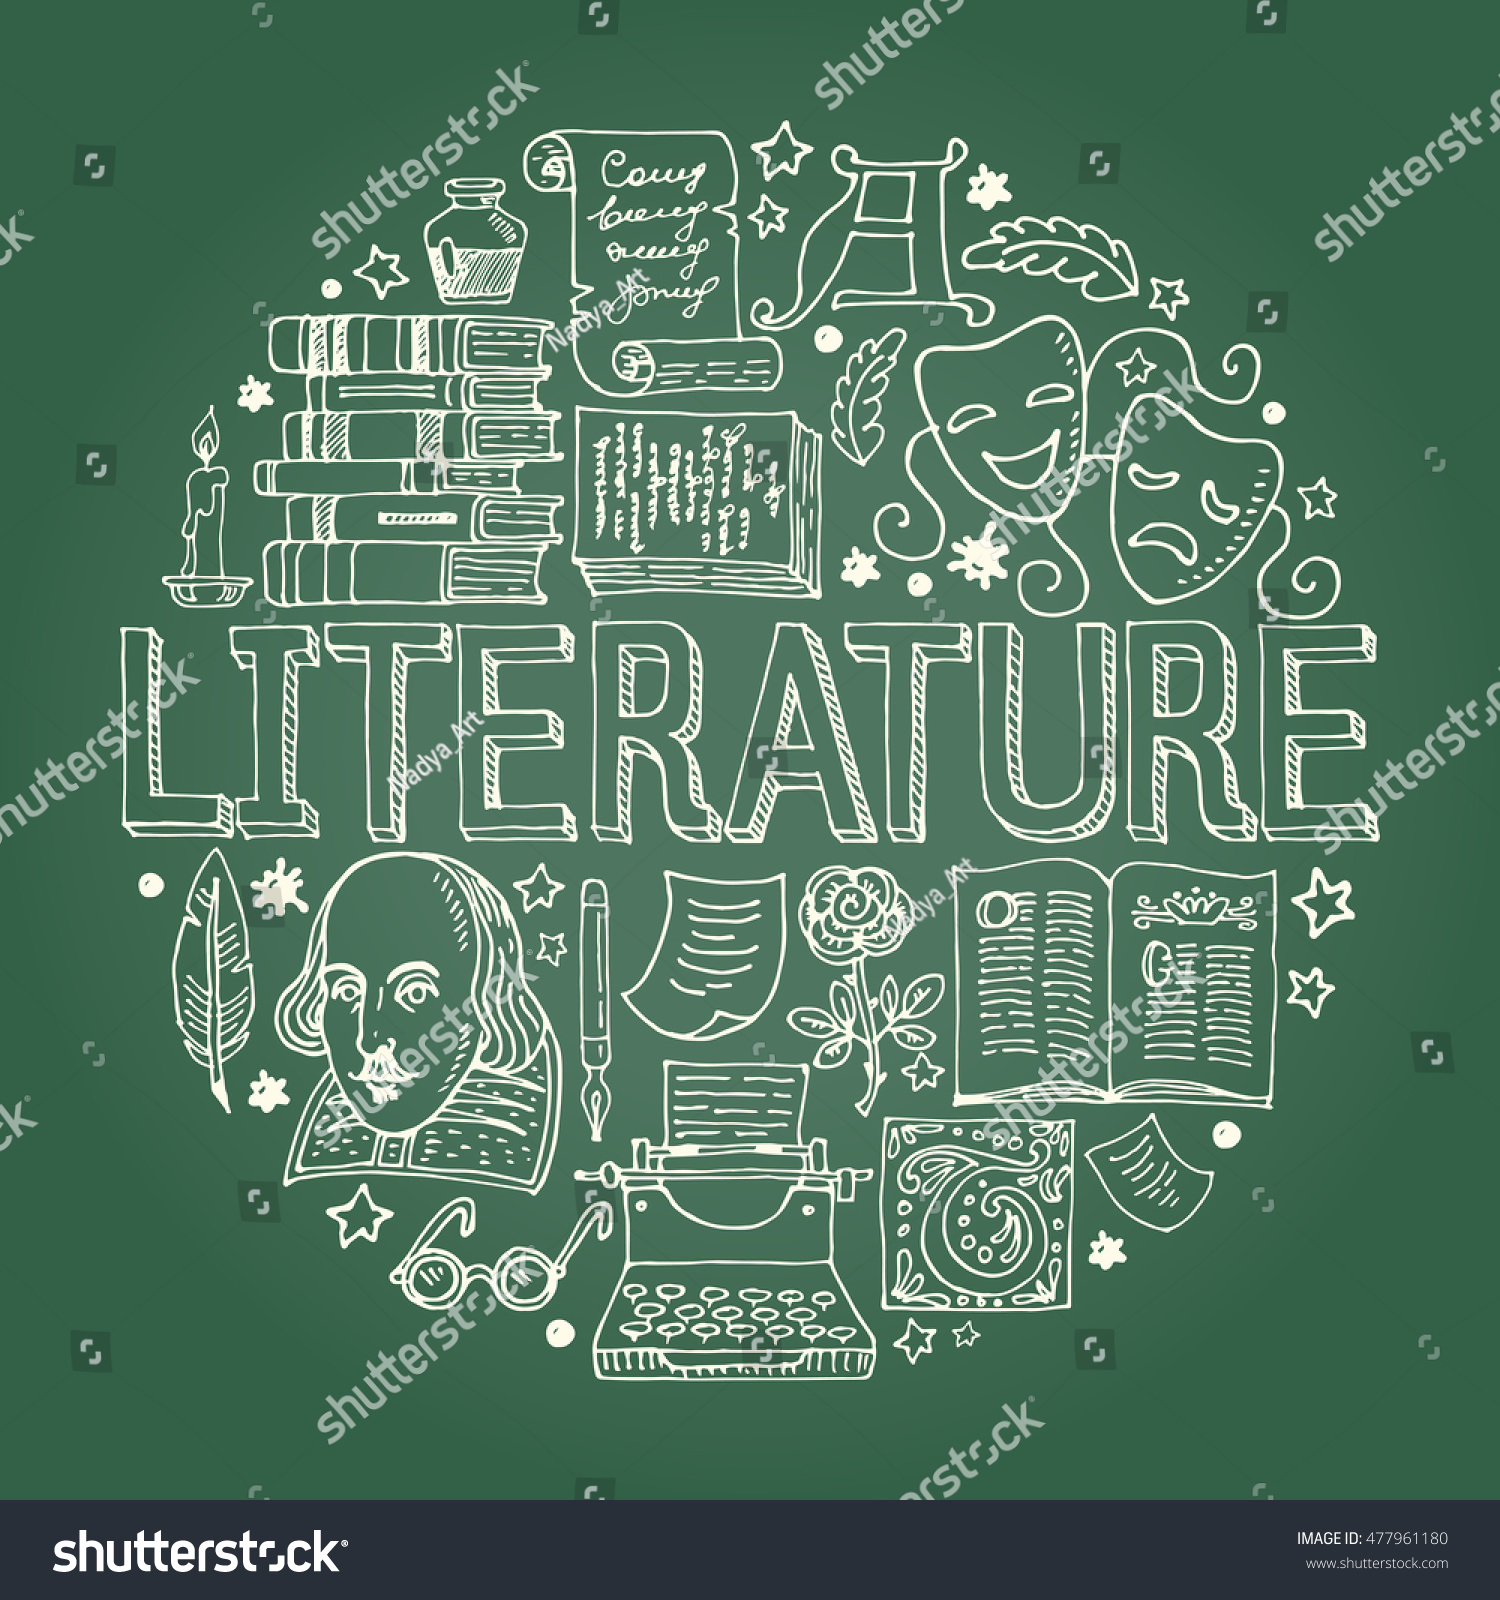 Literature Hand Drawn Vector Illustration Doodle Stock Vector (Royalty ...